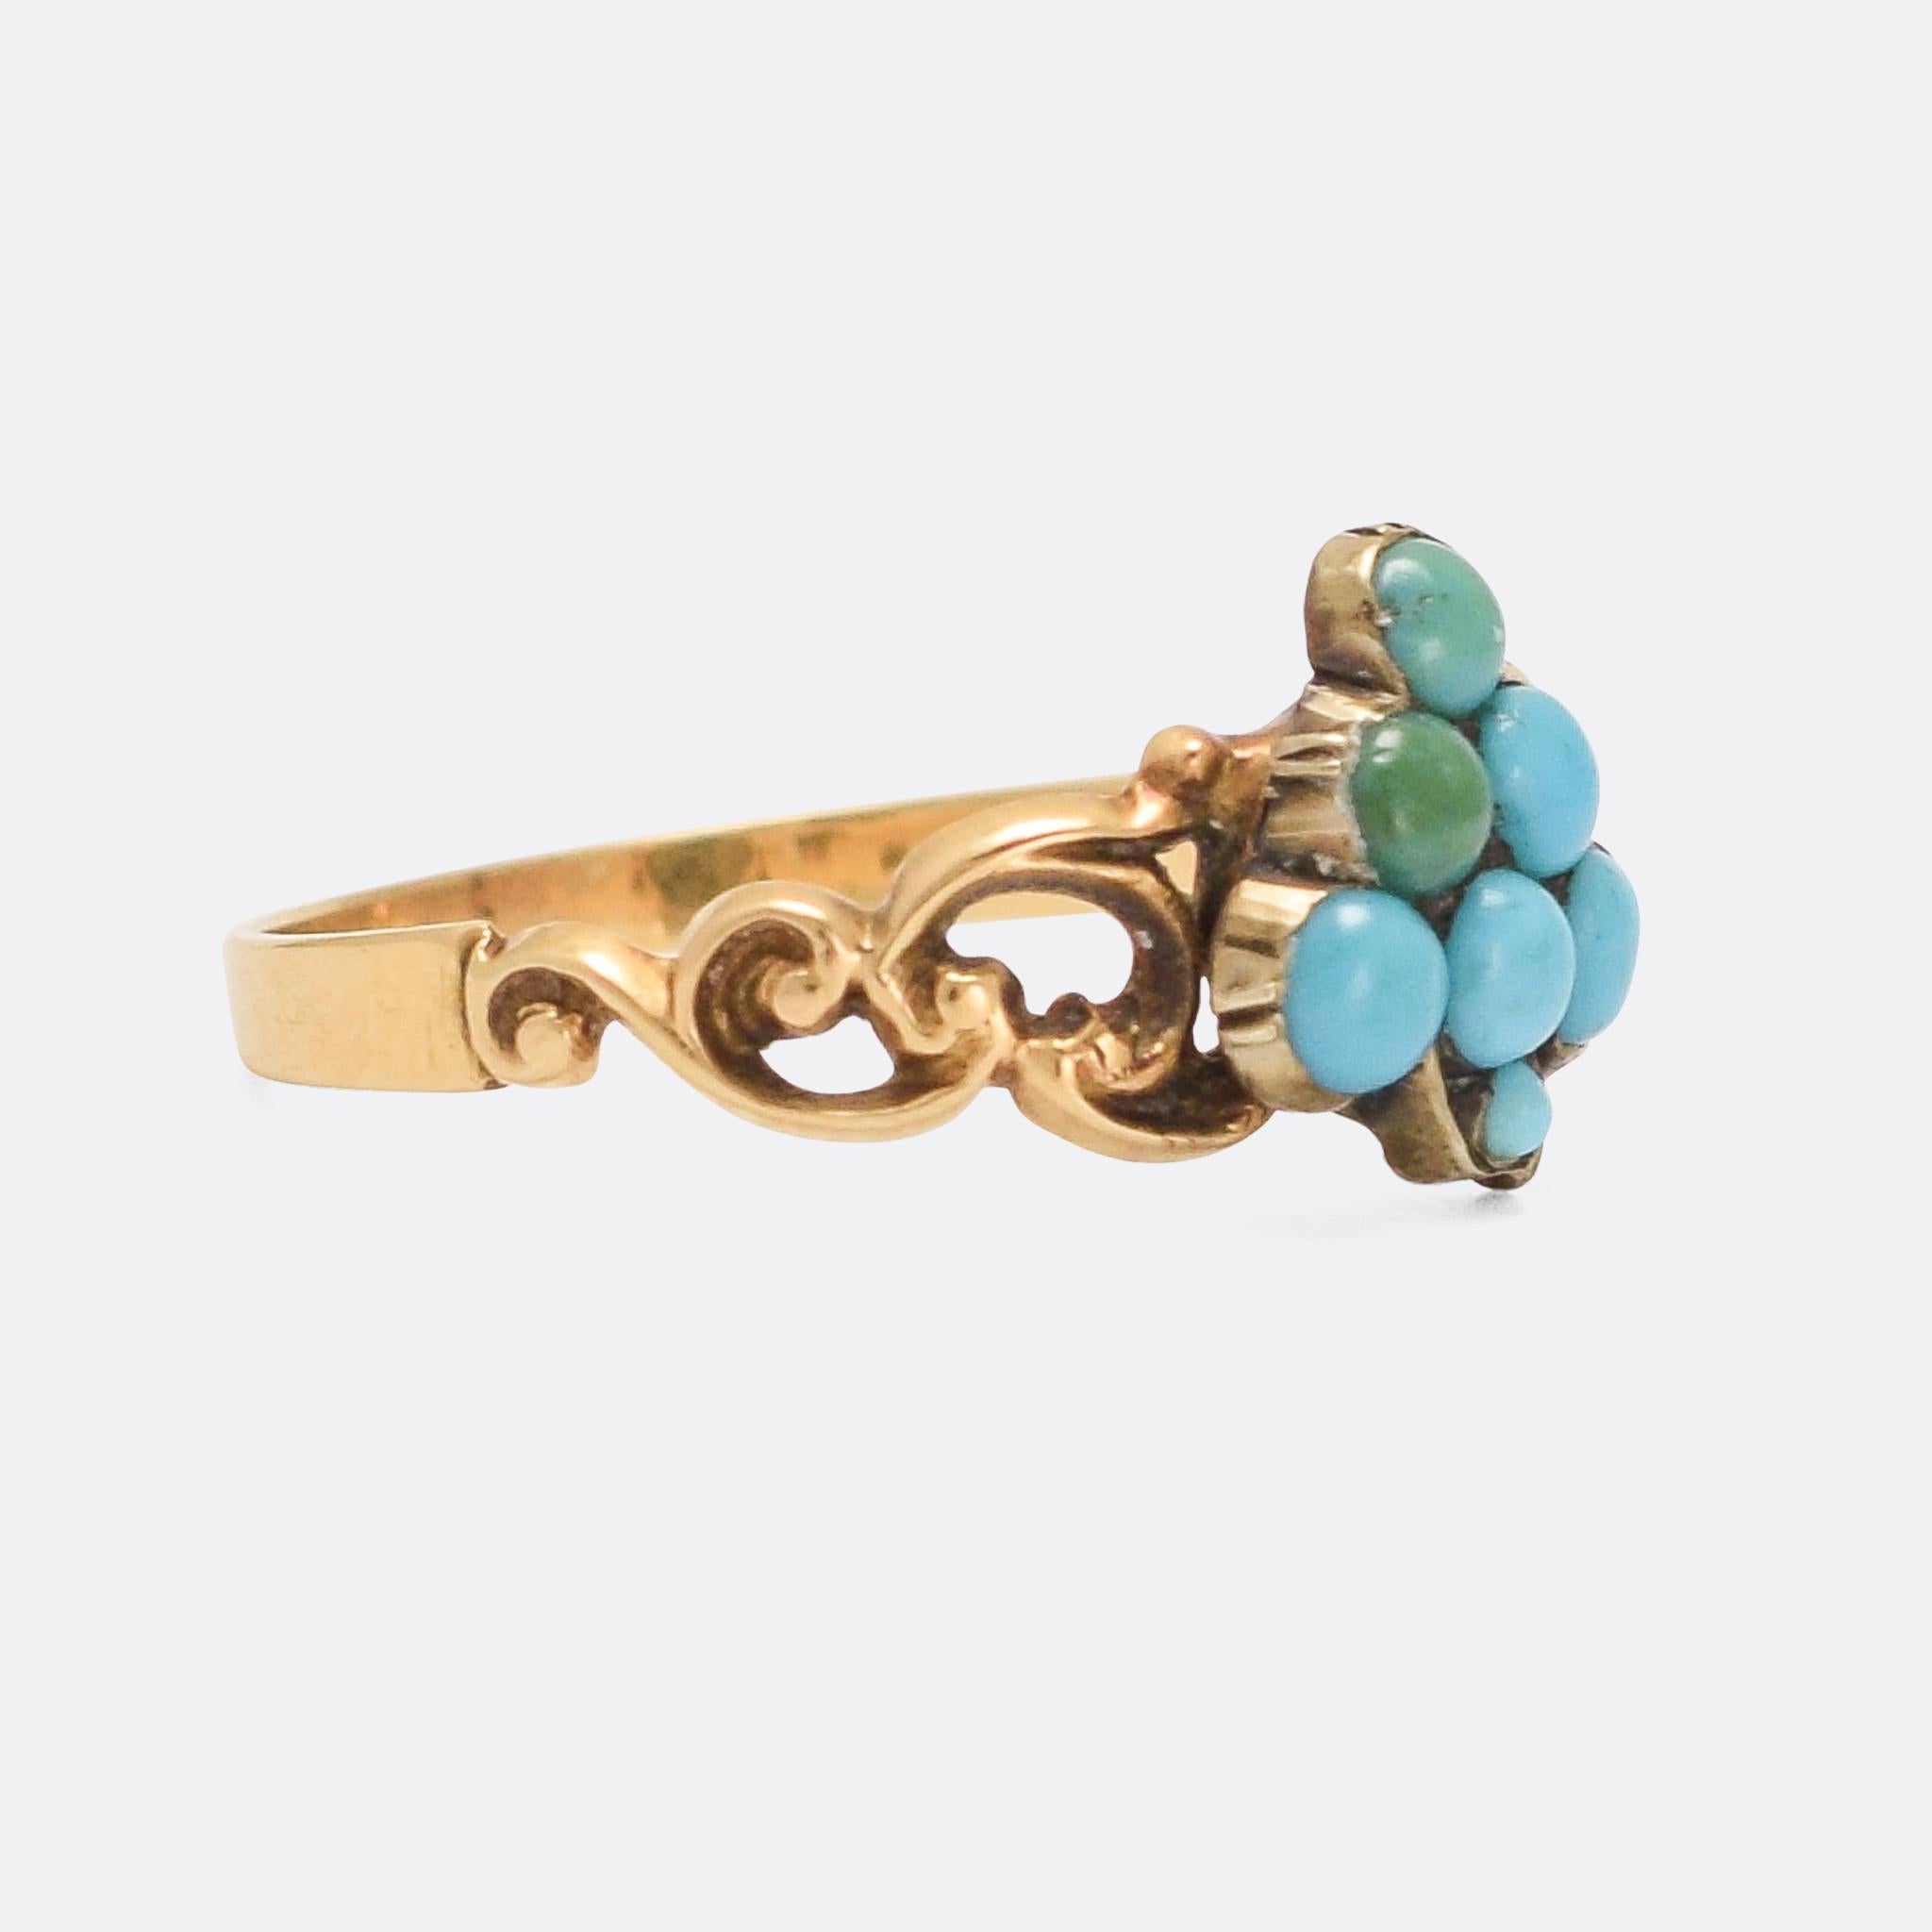 A sweet early Victorian ring, the head fashioned as a bunch of grapes and set with seven turquoise cabochons. It features ornate scrolled openwork shoulders, and it's modelled in 15k gold throughout.

STONES 
Turquoise

RING SIZE
6.25